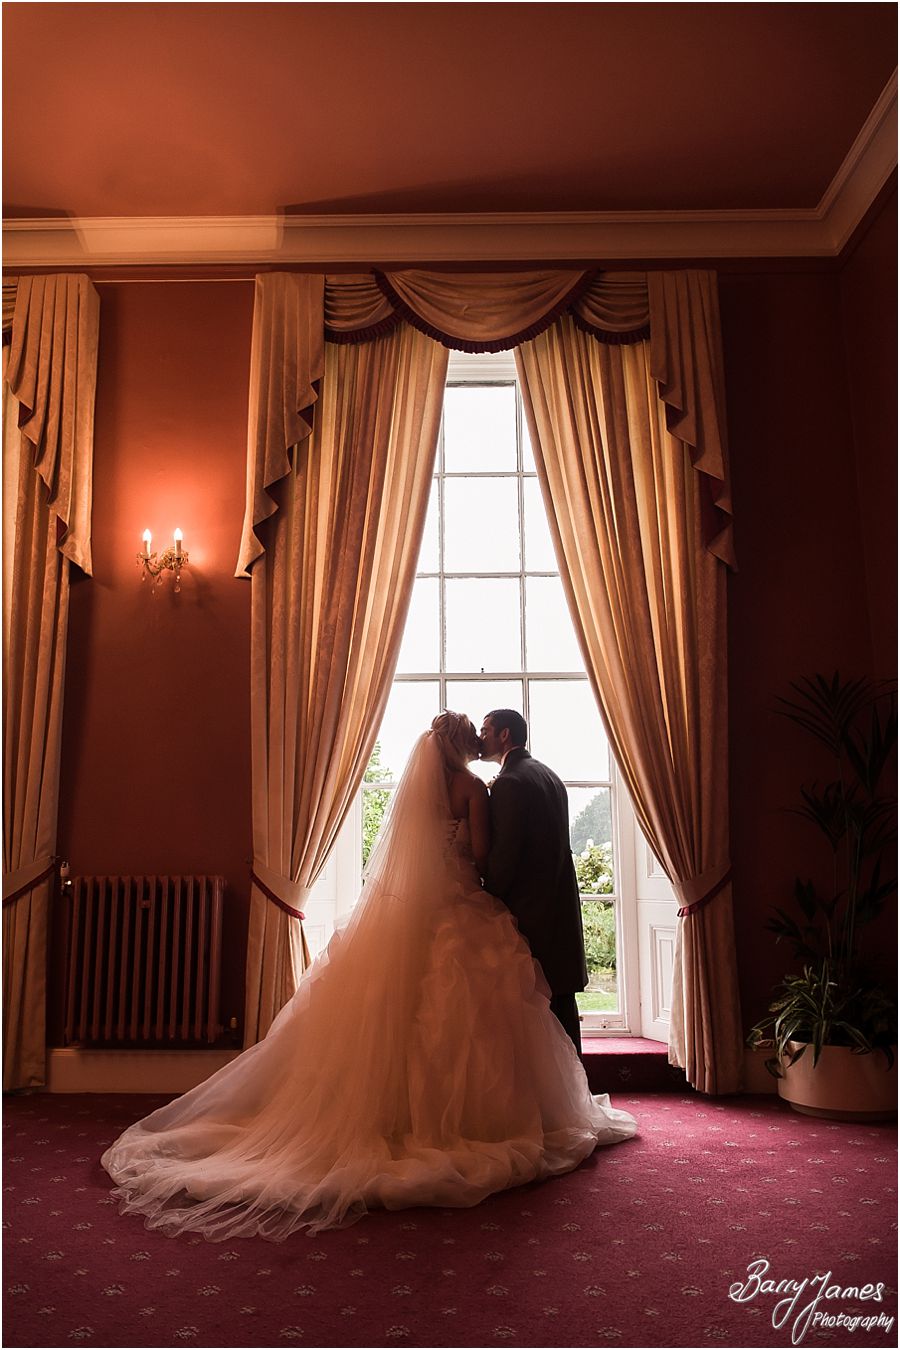 Beautiful wedding photographs utilising the stunning setting inside at Himley Hall in Dudley by Dudley Wedding Photographer Barry James